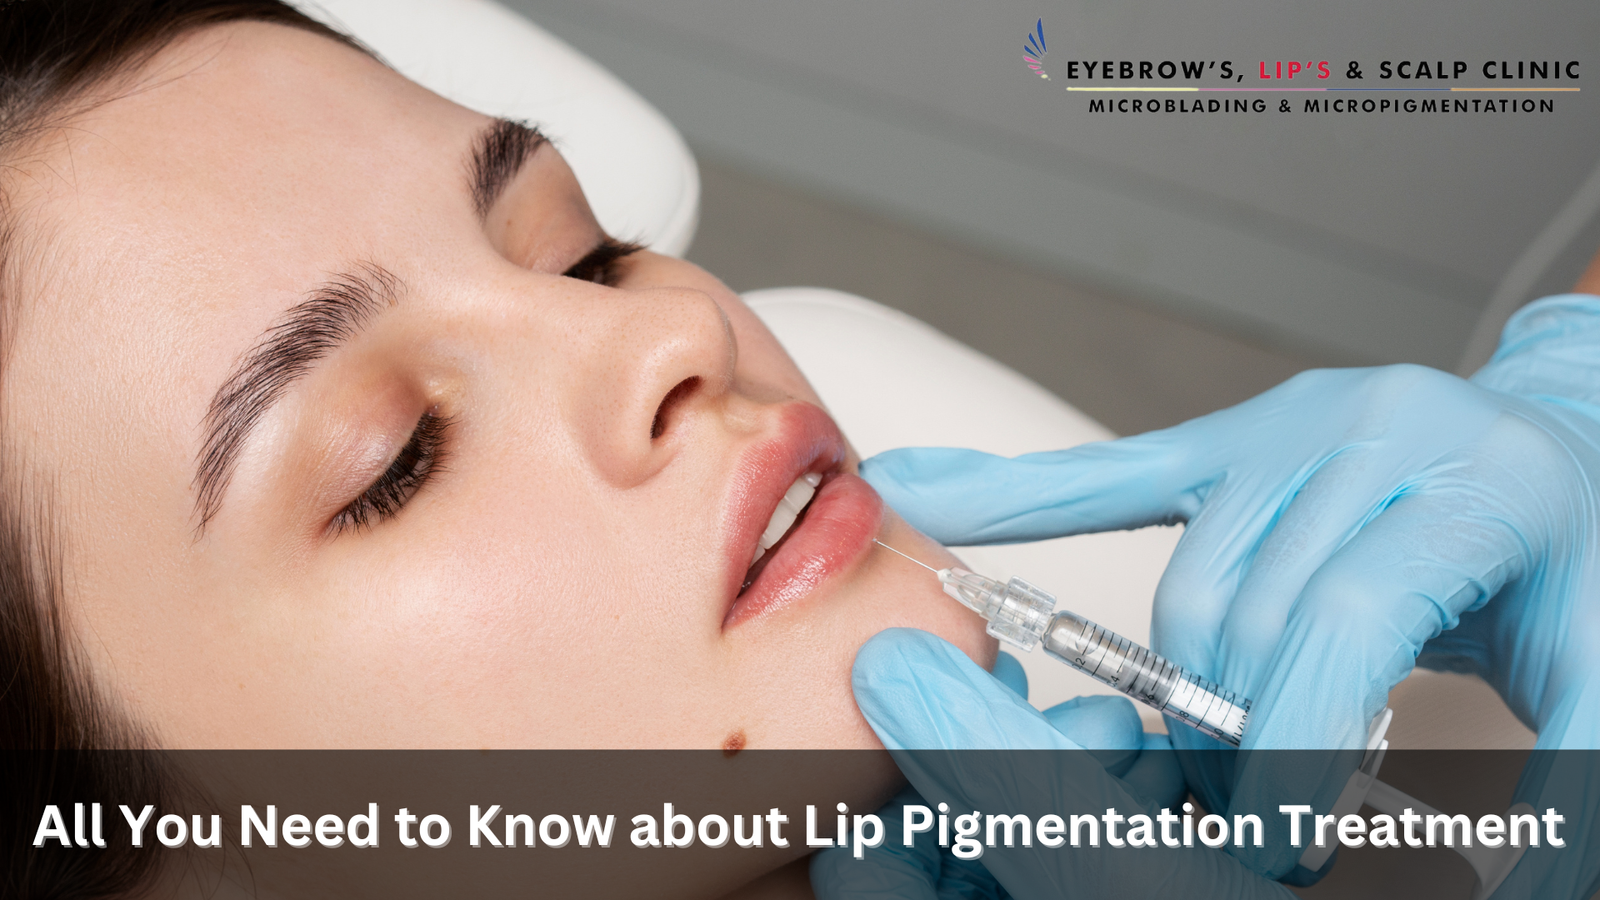 All You Need to Know about Lip Pigmentation Treatment